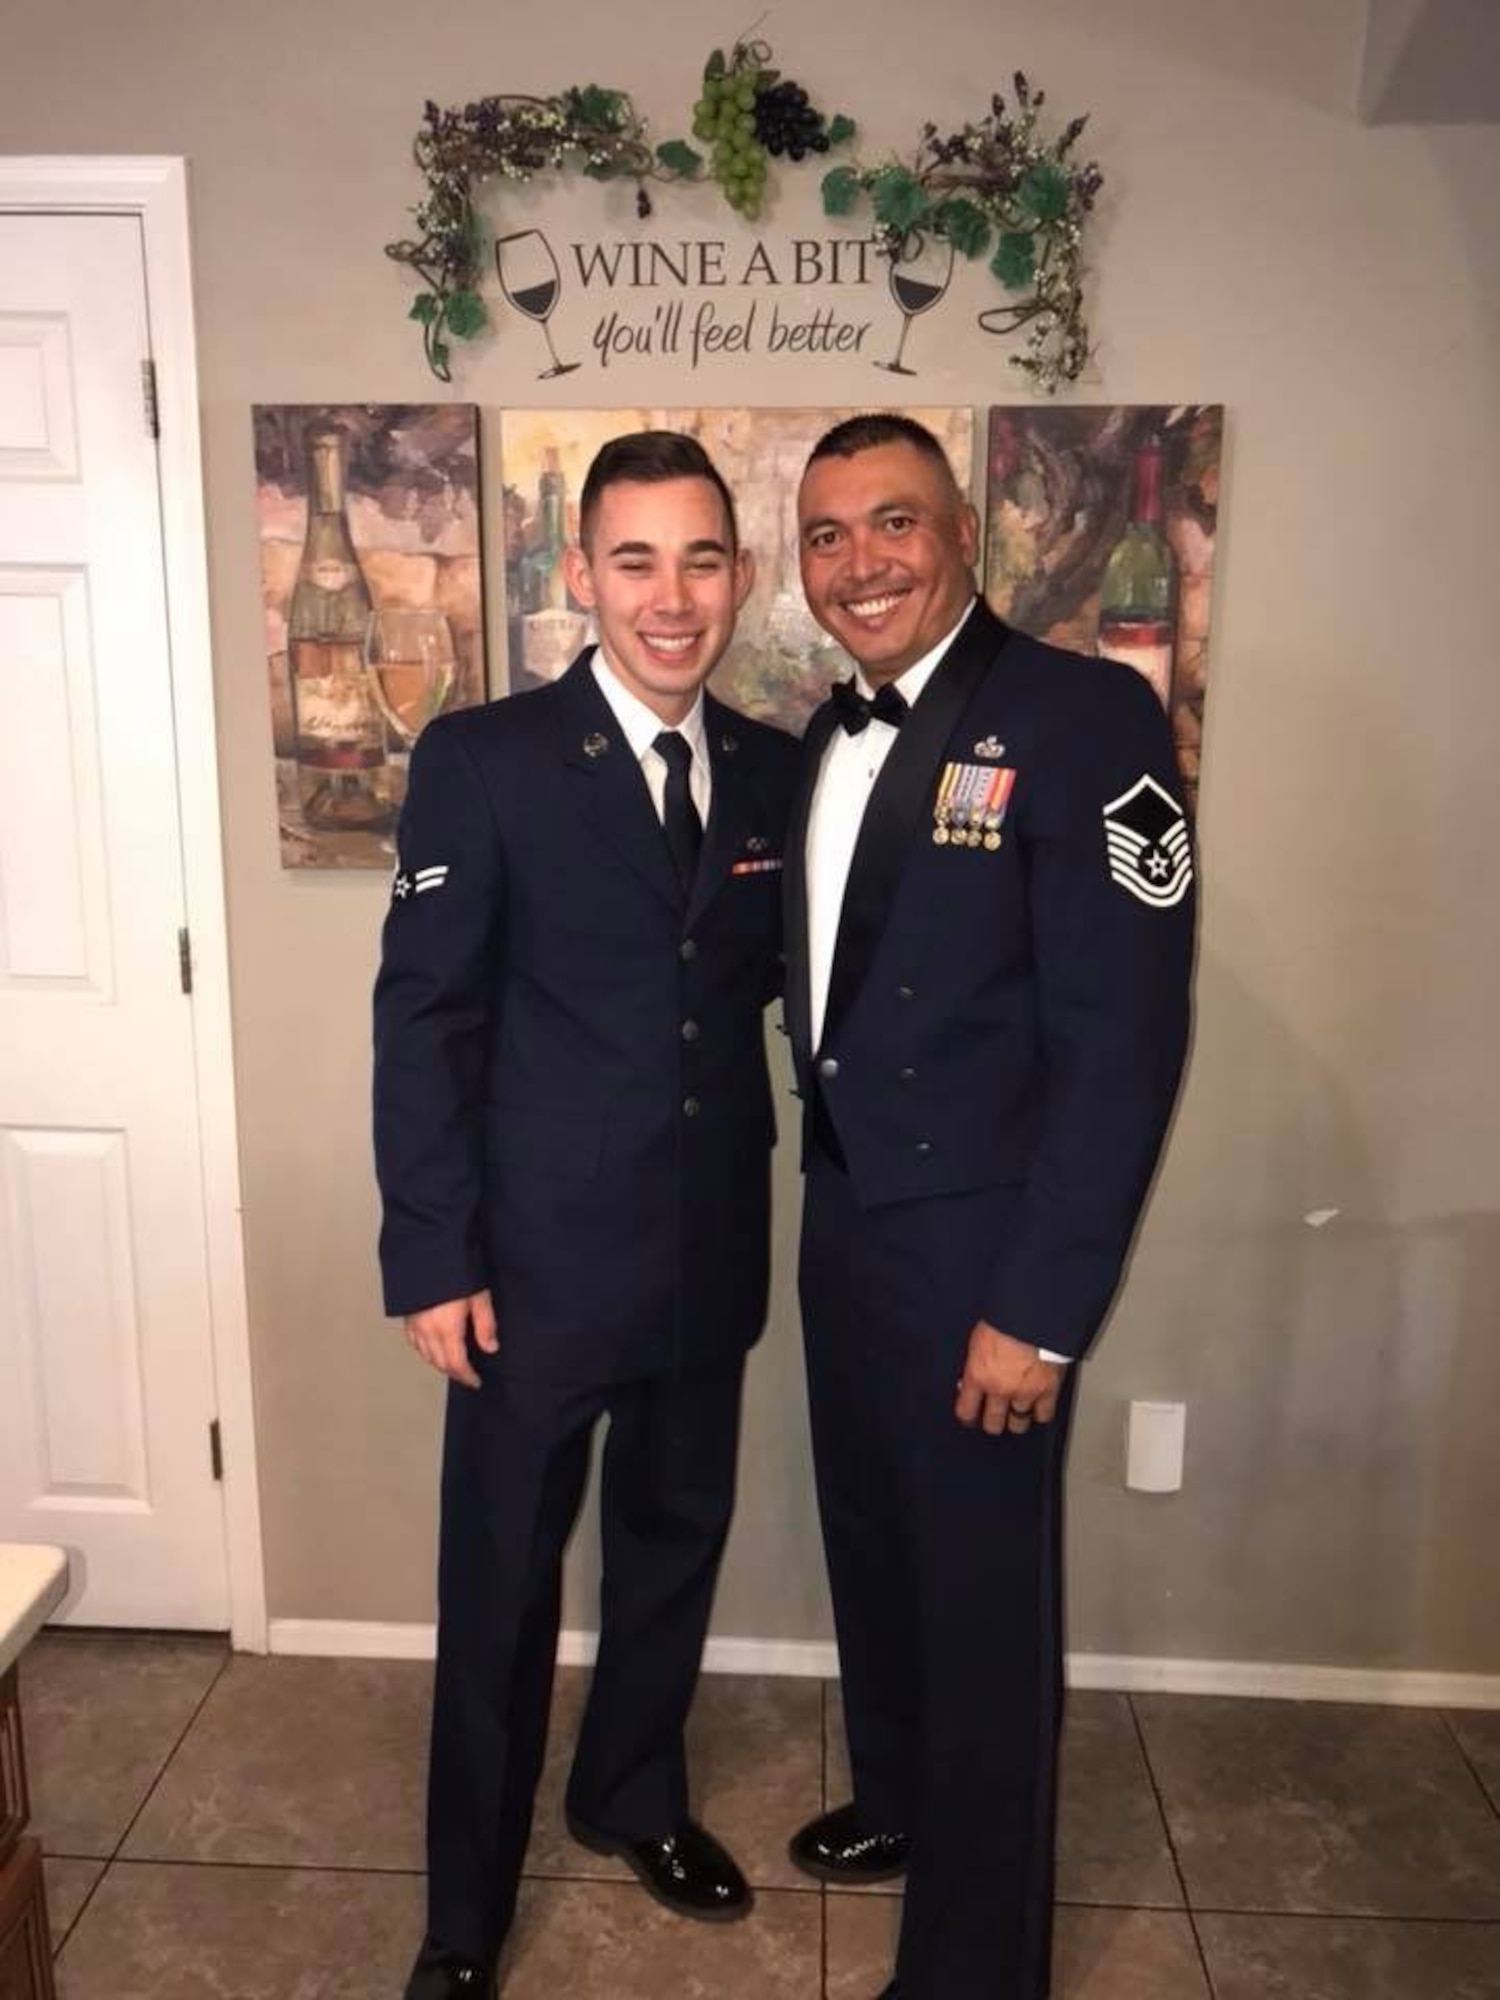 U.S. Air Force Airman 1st Class Anthony Castro and Master Sgt. Jonathan Herrera pose for a photo before Herrera’s SNCO Induction Ceremony at Davis-Monthan Air Force Base, Ariz., Aug. 31, 2018. Herrera and Castro are a father and son duo both in the Air Force, assigned to the same Air Force Specialty Code, same duty station at Davis-Monthan Air Force Base, Ariz., and now the same deployed location at Al Dhafra Air Base, United Arab Emirates. (Courtesy photo)